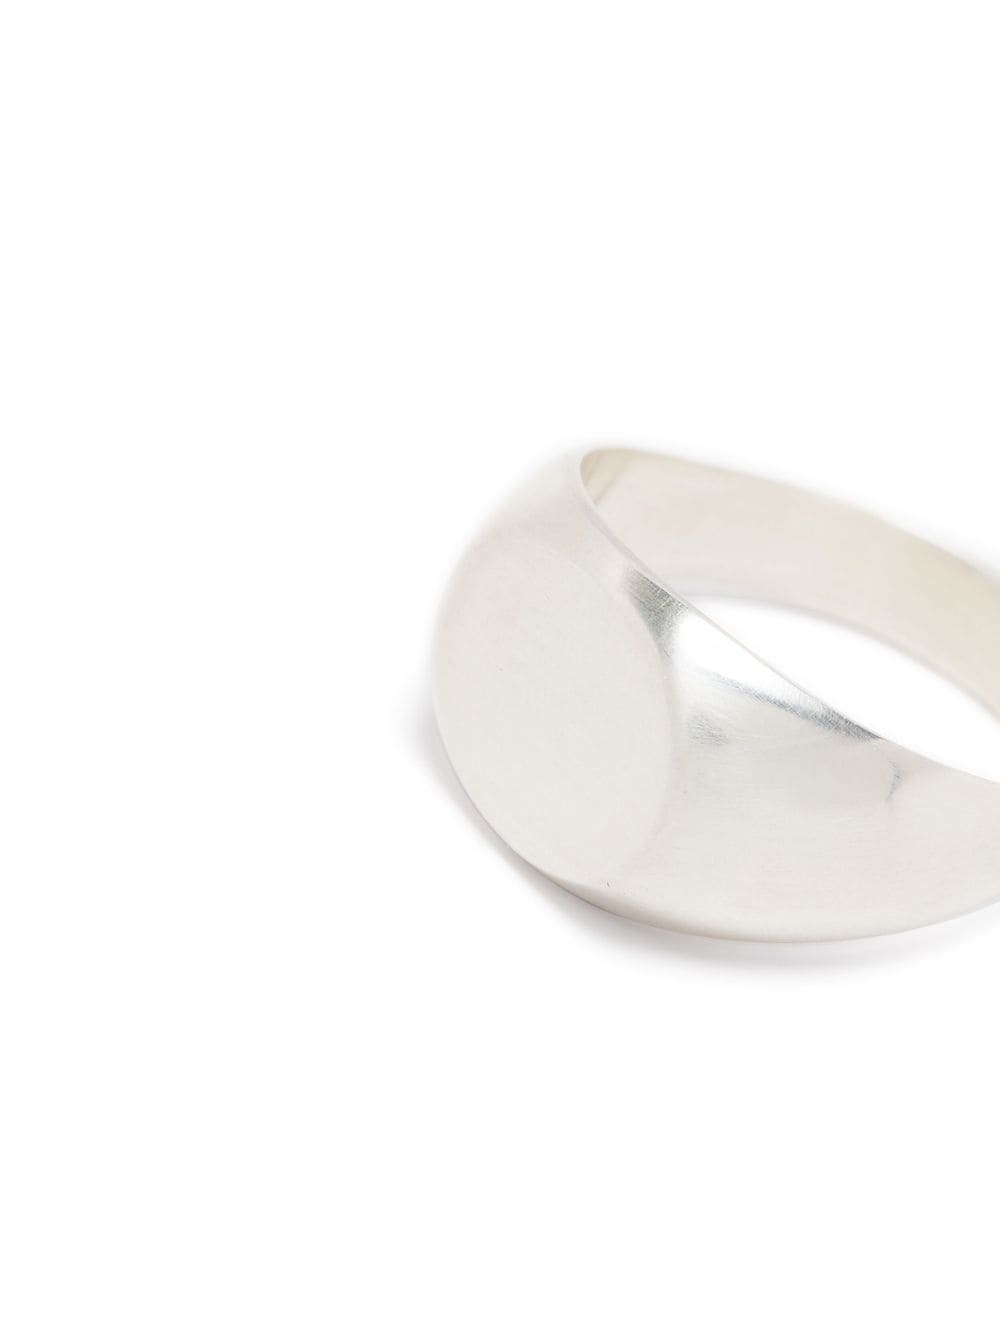 silver signet band ring